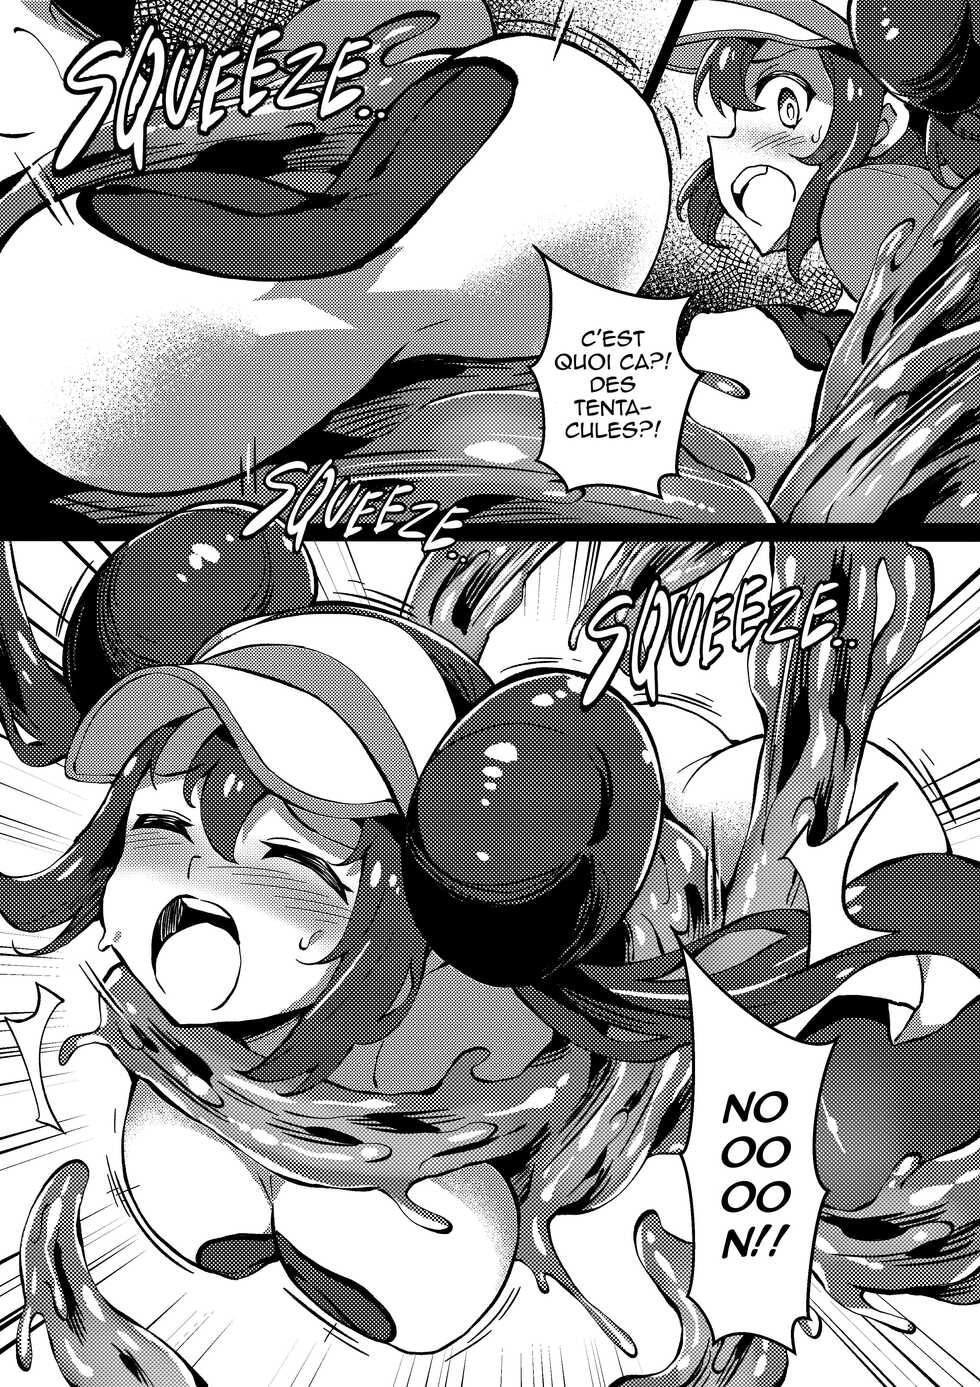 [Mist Night (Co_Ma)] Poke Hell Monsters Ep.4 (Rosa) (Pokémon) [French] [FrenchWanker] - Page 7